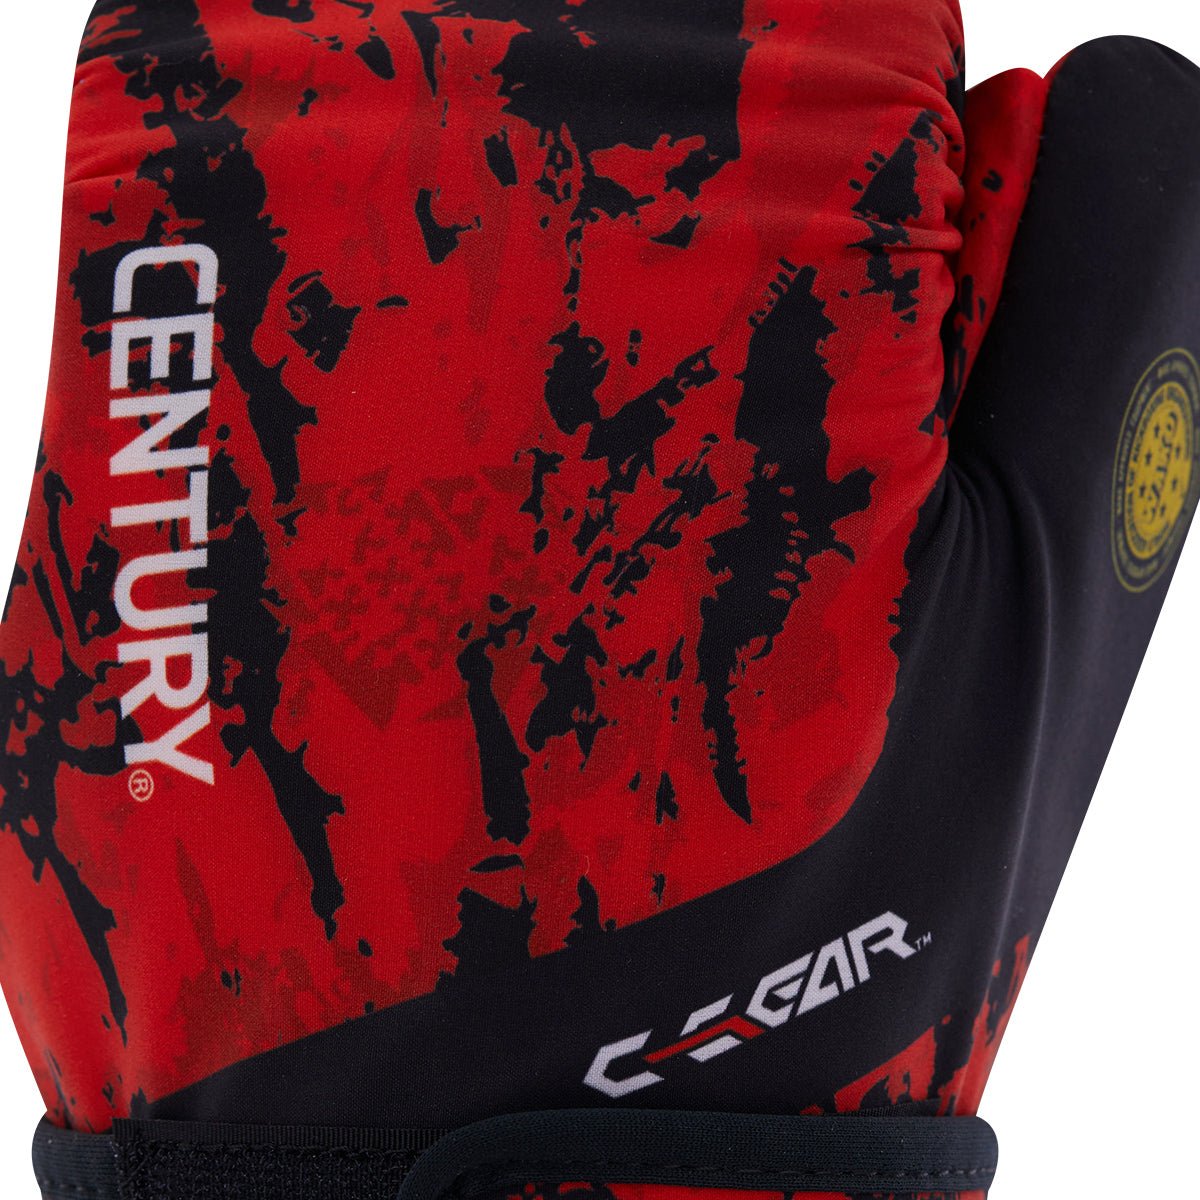 C-Gear Sport Respect Punches